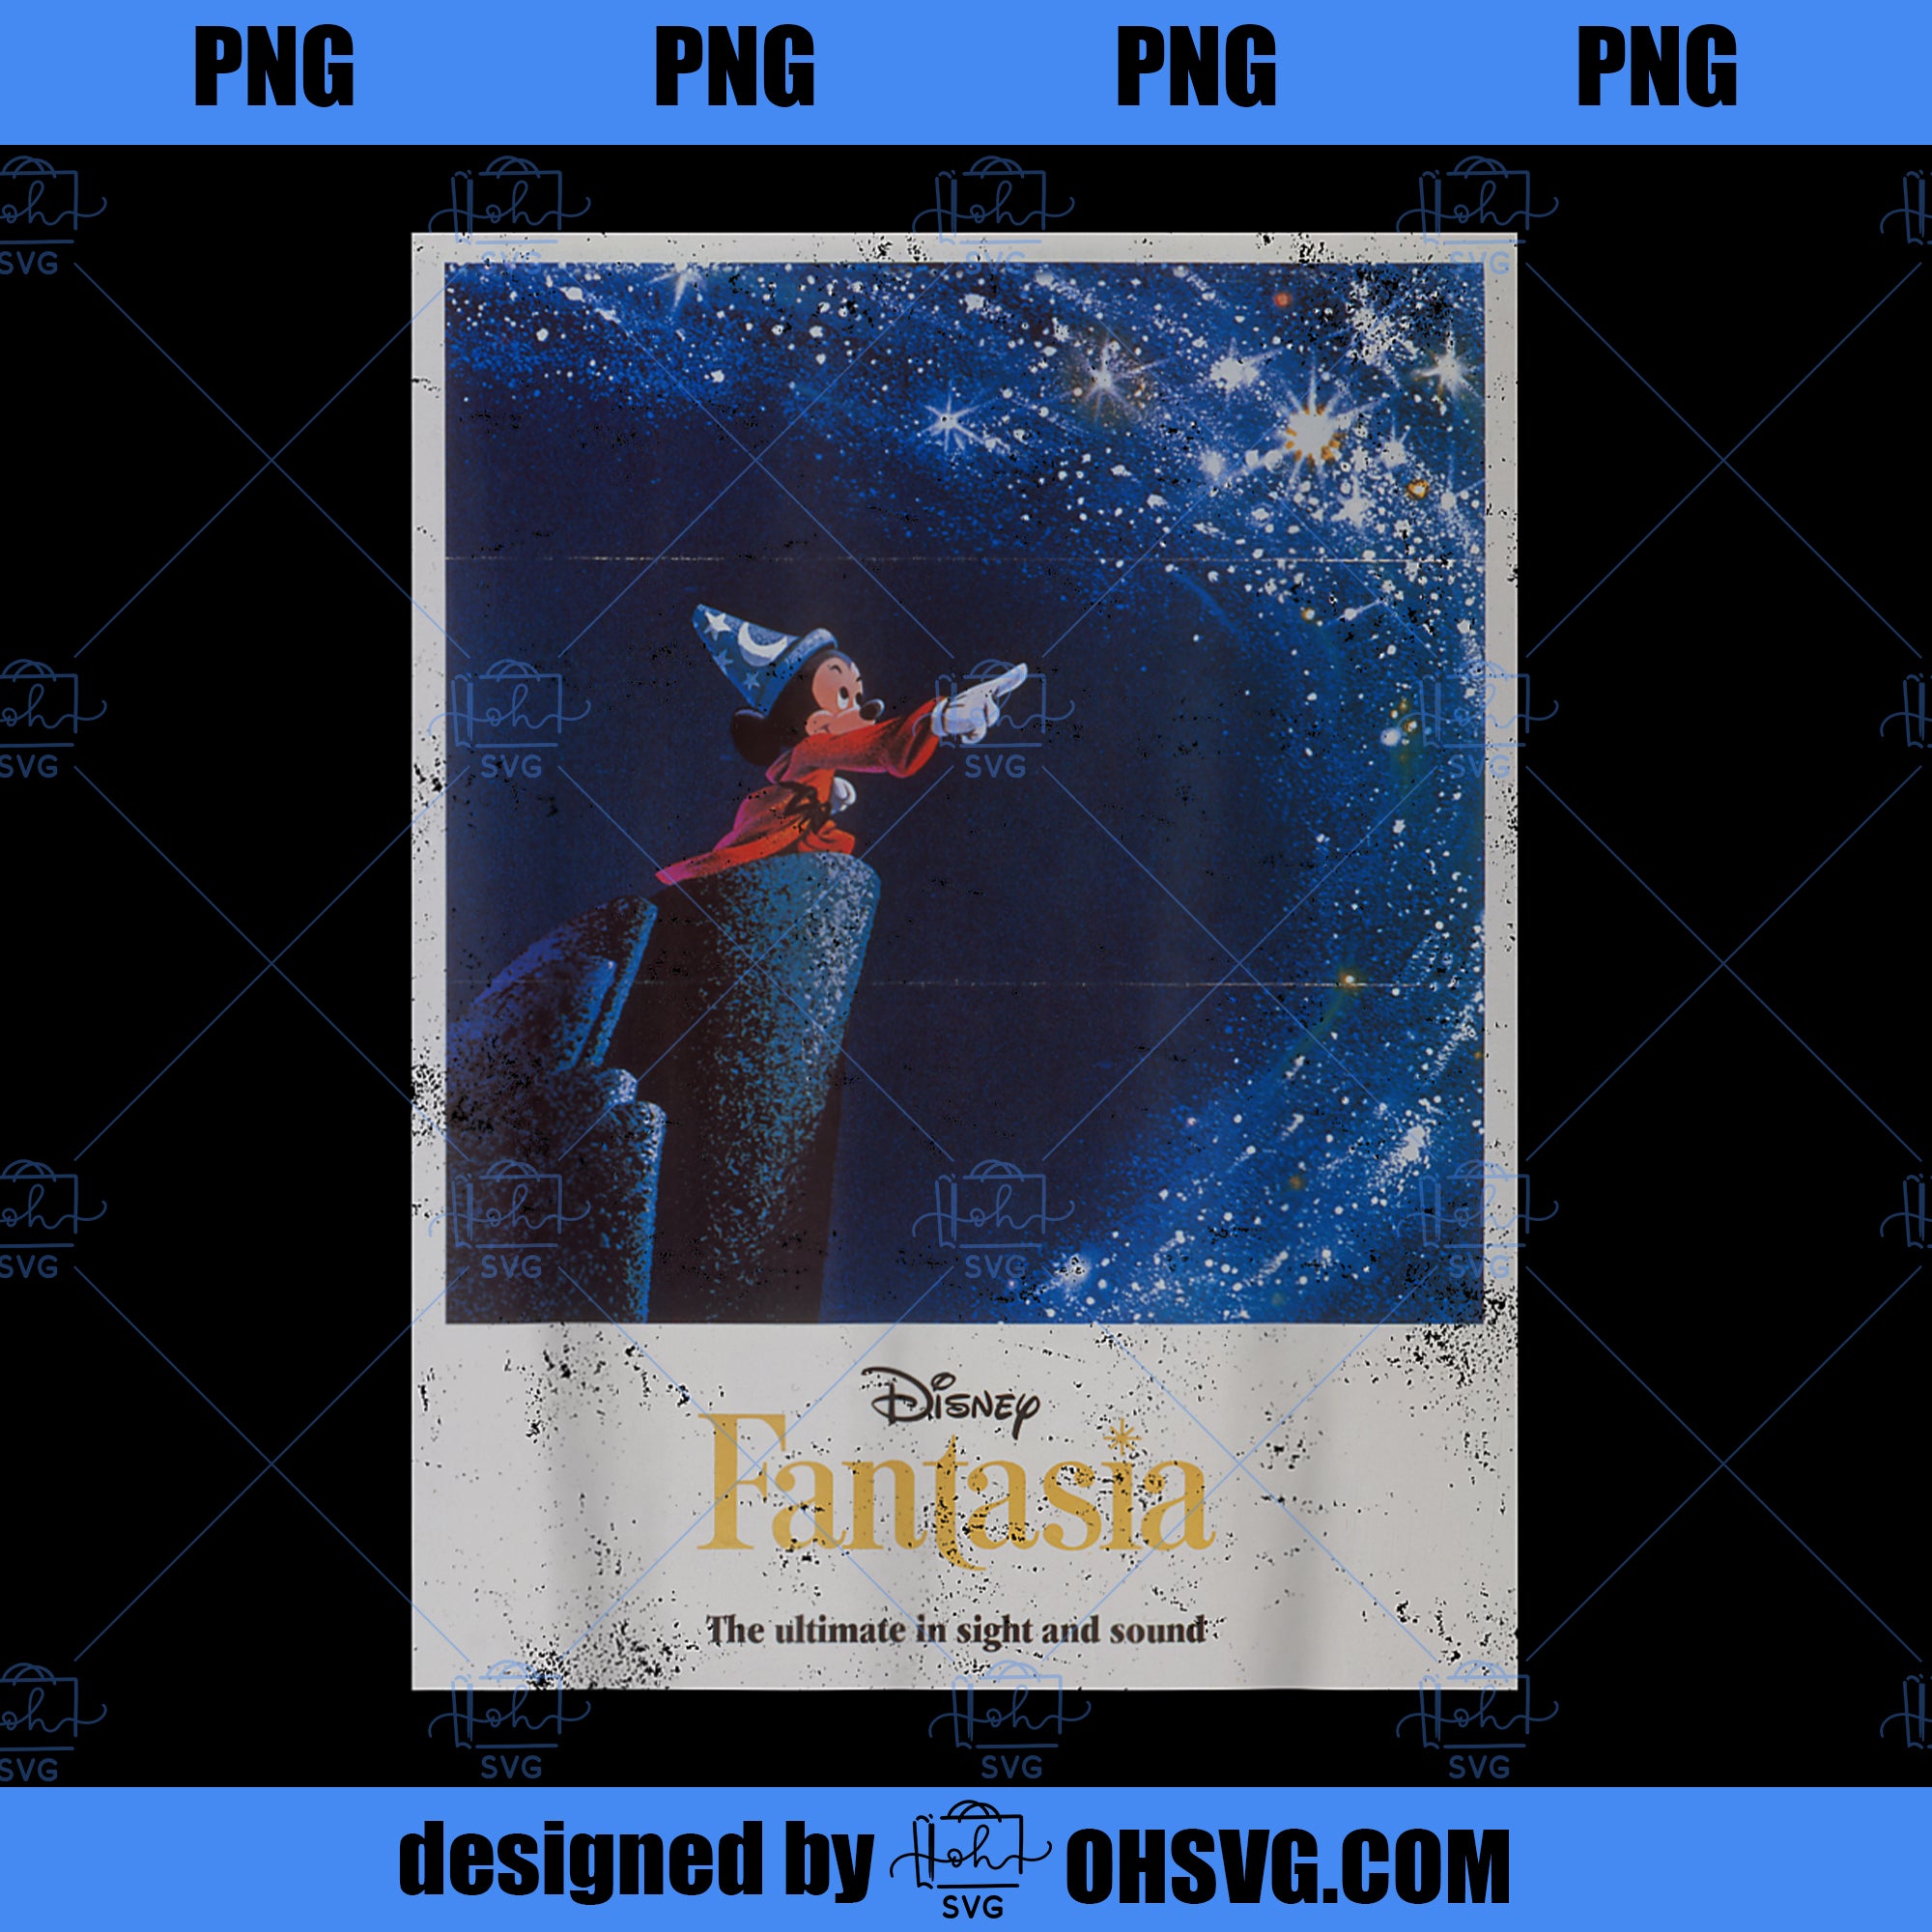 Disney Mickey Mouse Fantasia Retro Poster PNG, Disney PNG, Mickey Friends PNG